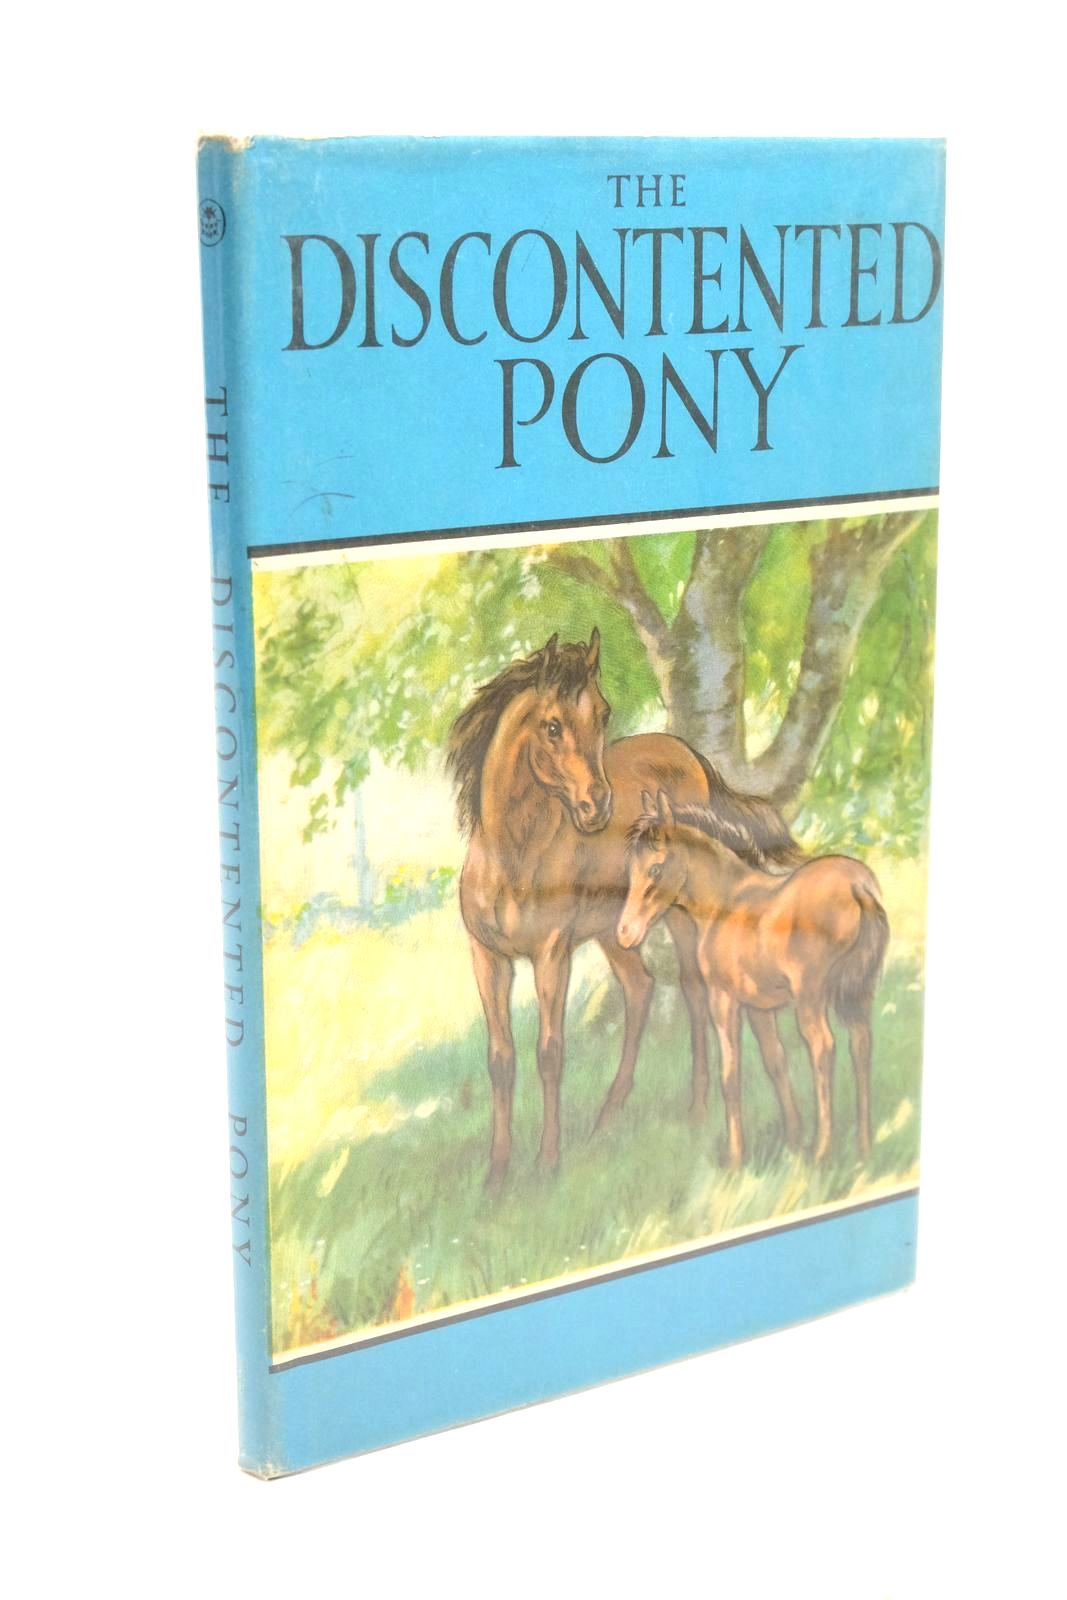 Photo of THE DISCONTENTED PONY written by Barr, Noel illustrated by Hickling, P.B. published by Wills &amp; Hepworth Ltd. (STOCK CODE: 1322399)  for sale by Stella & Rose's Books